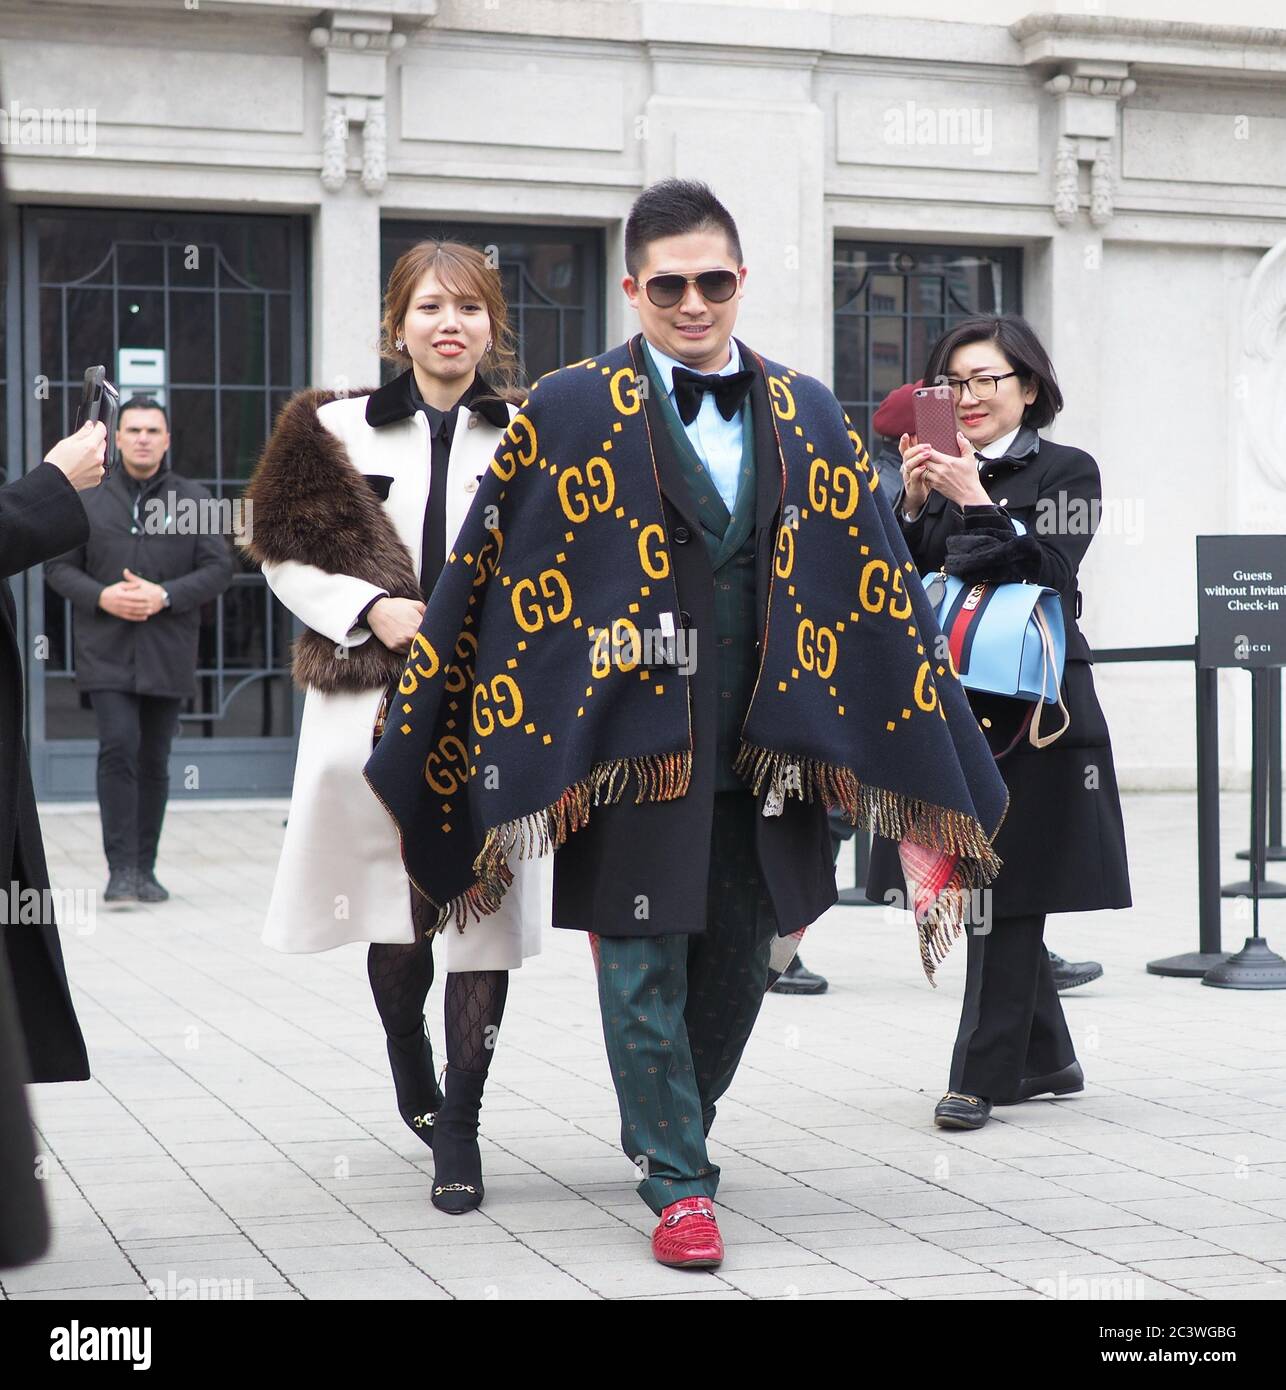 Milan, Italy, 14 January 2020:Fashion bloggersstreet style outfits after Gucci  fashion show during Milano fashion week 2020 Stock Photo - Alamy